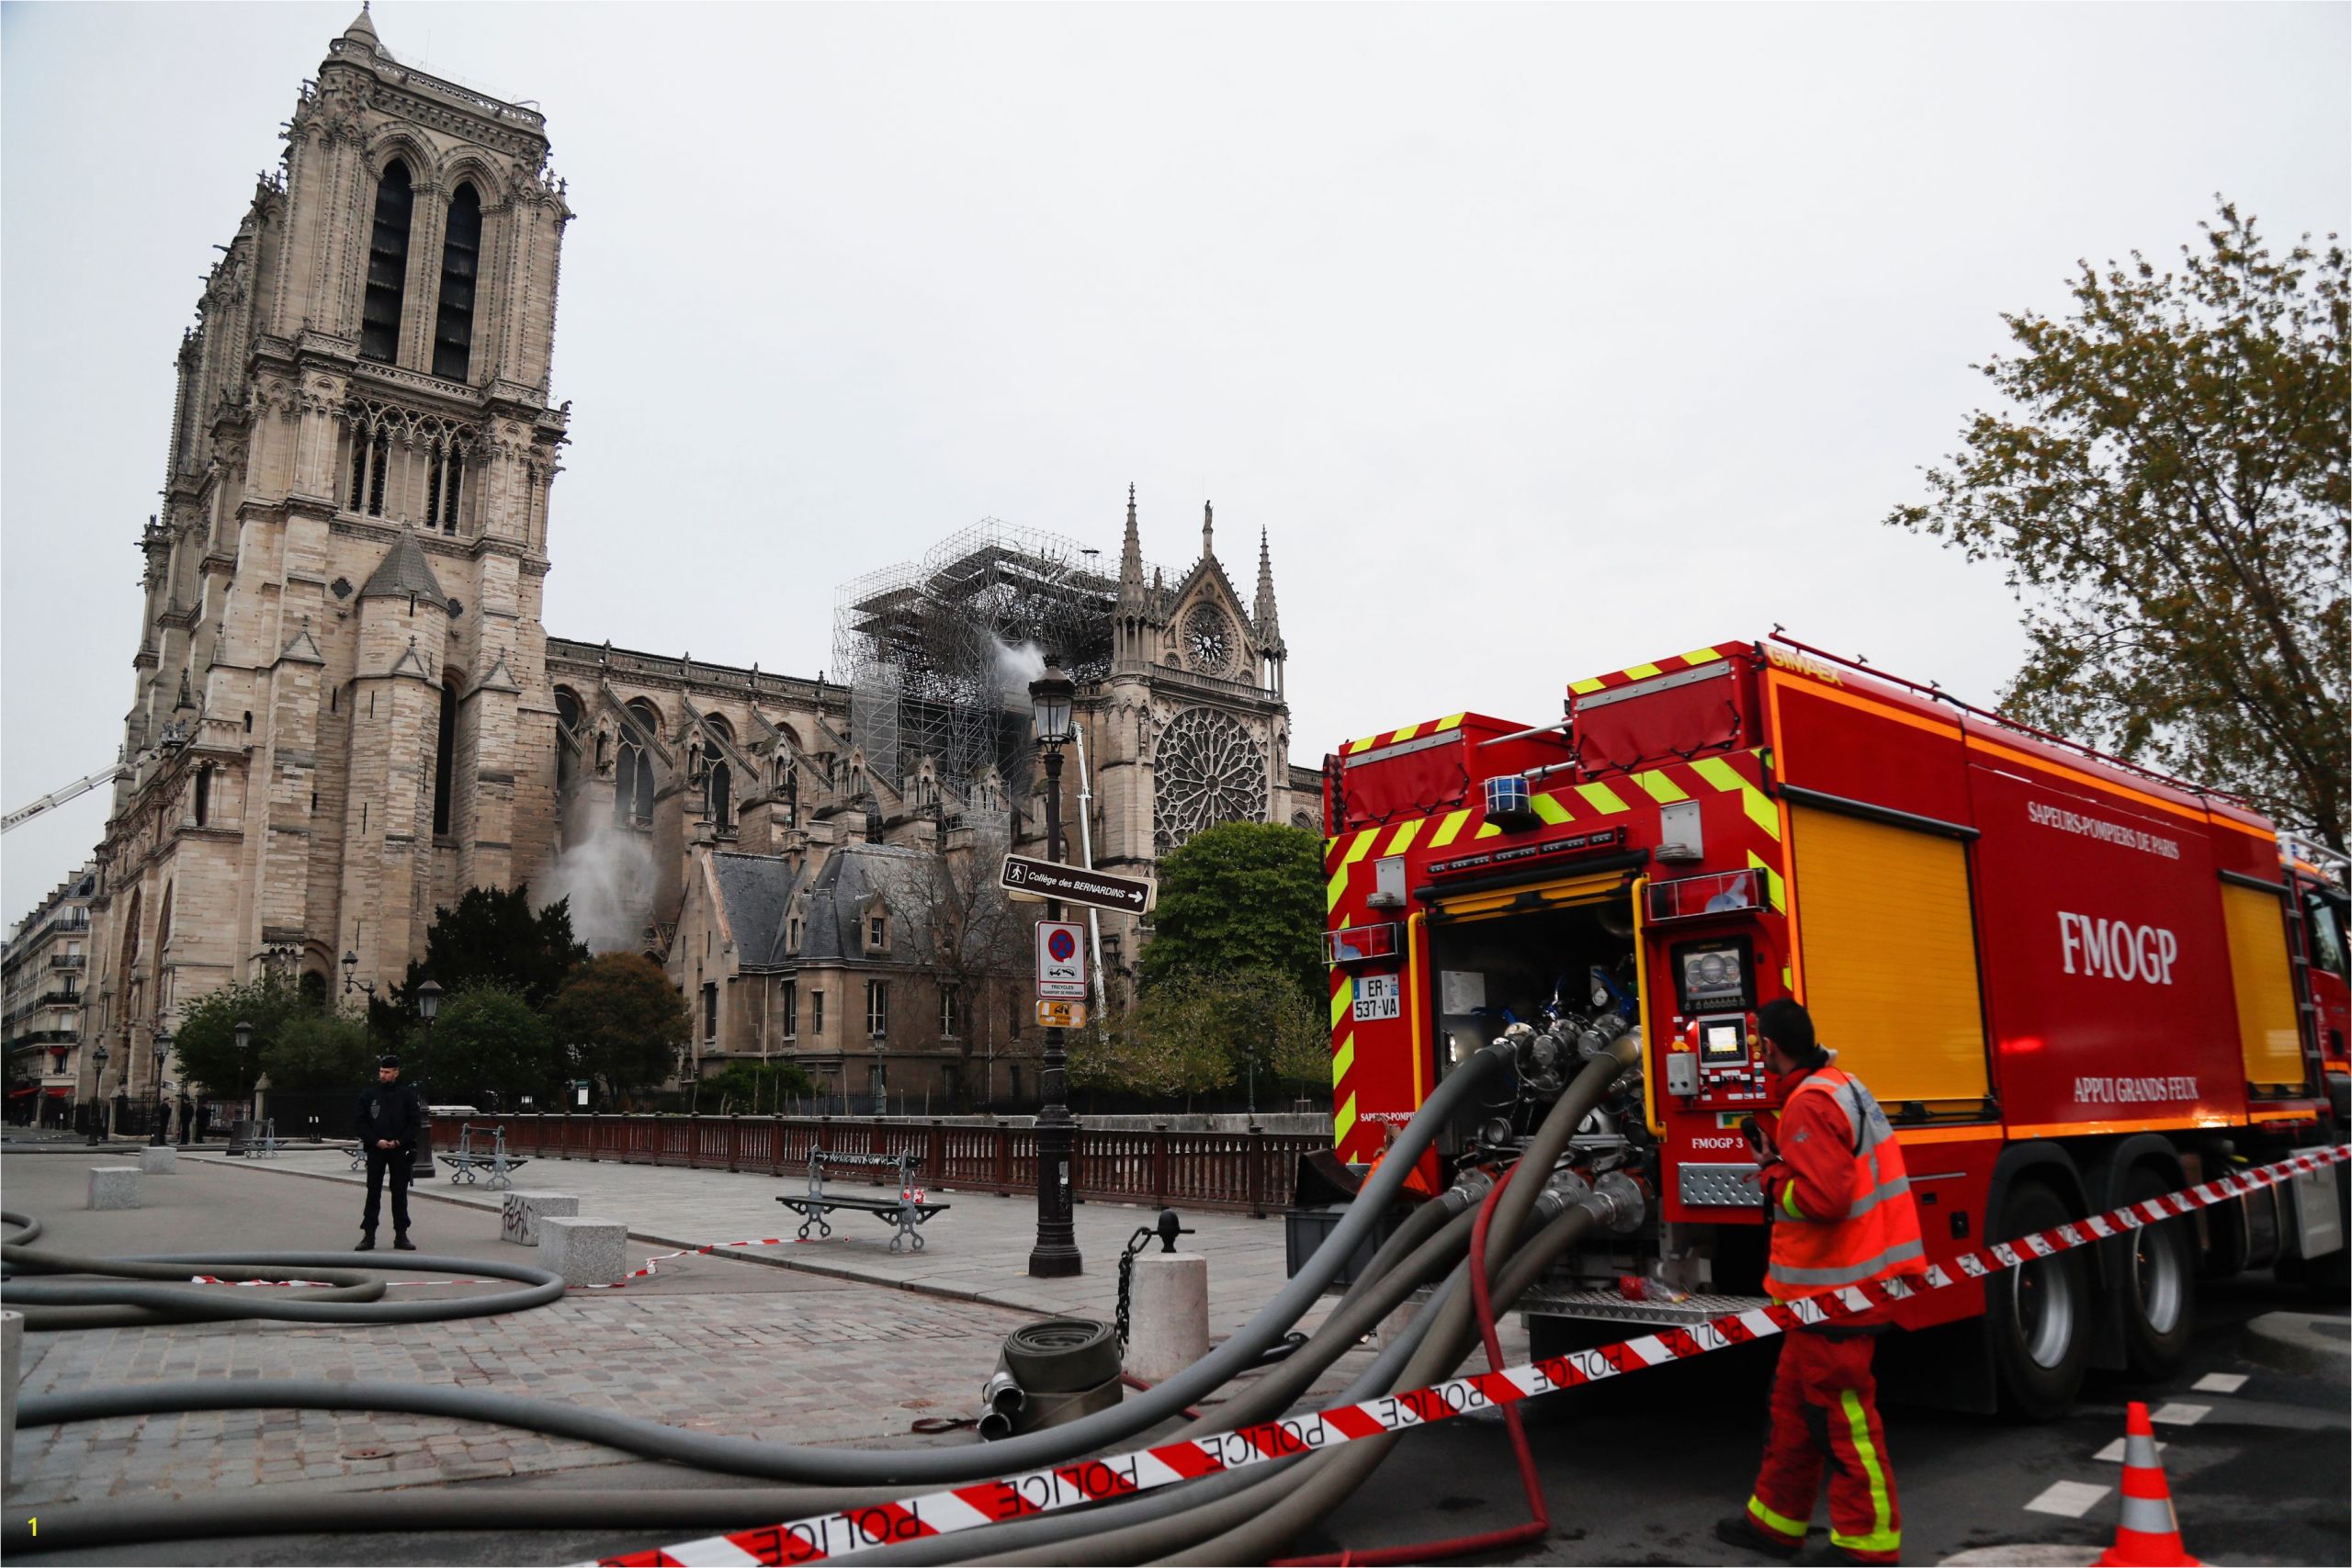 Notre Dame Coloring Pages Fire Extinguished after Nine Hours